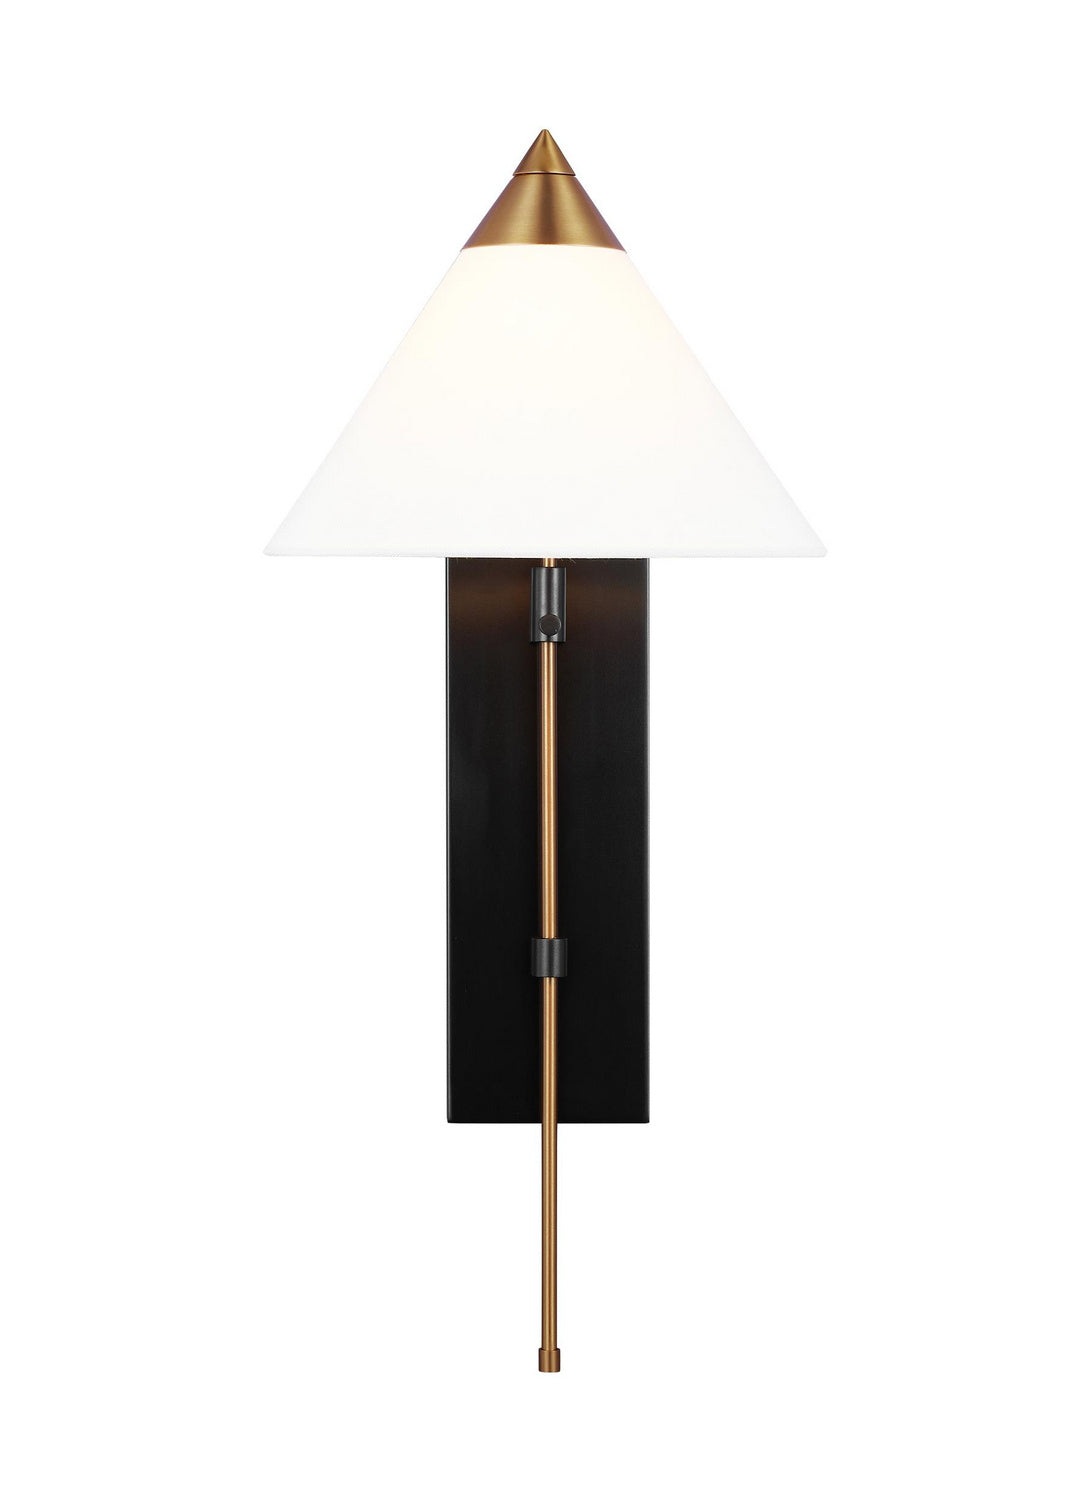 Visual Comfort Studio Canada - One Light Wall Sconce - Franklin - Burnished Brass and Deep Bronze- Union Lighting Luminaires Decor